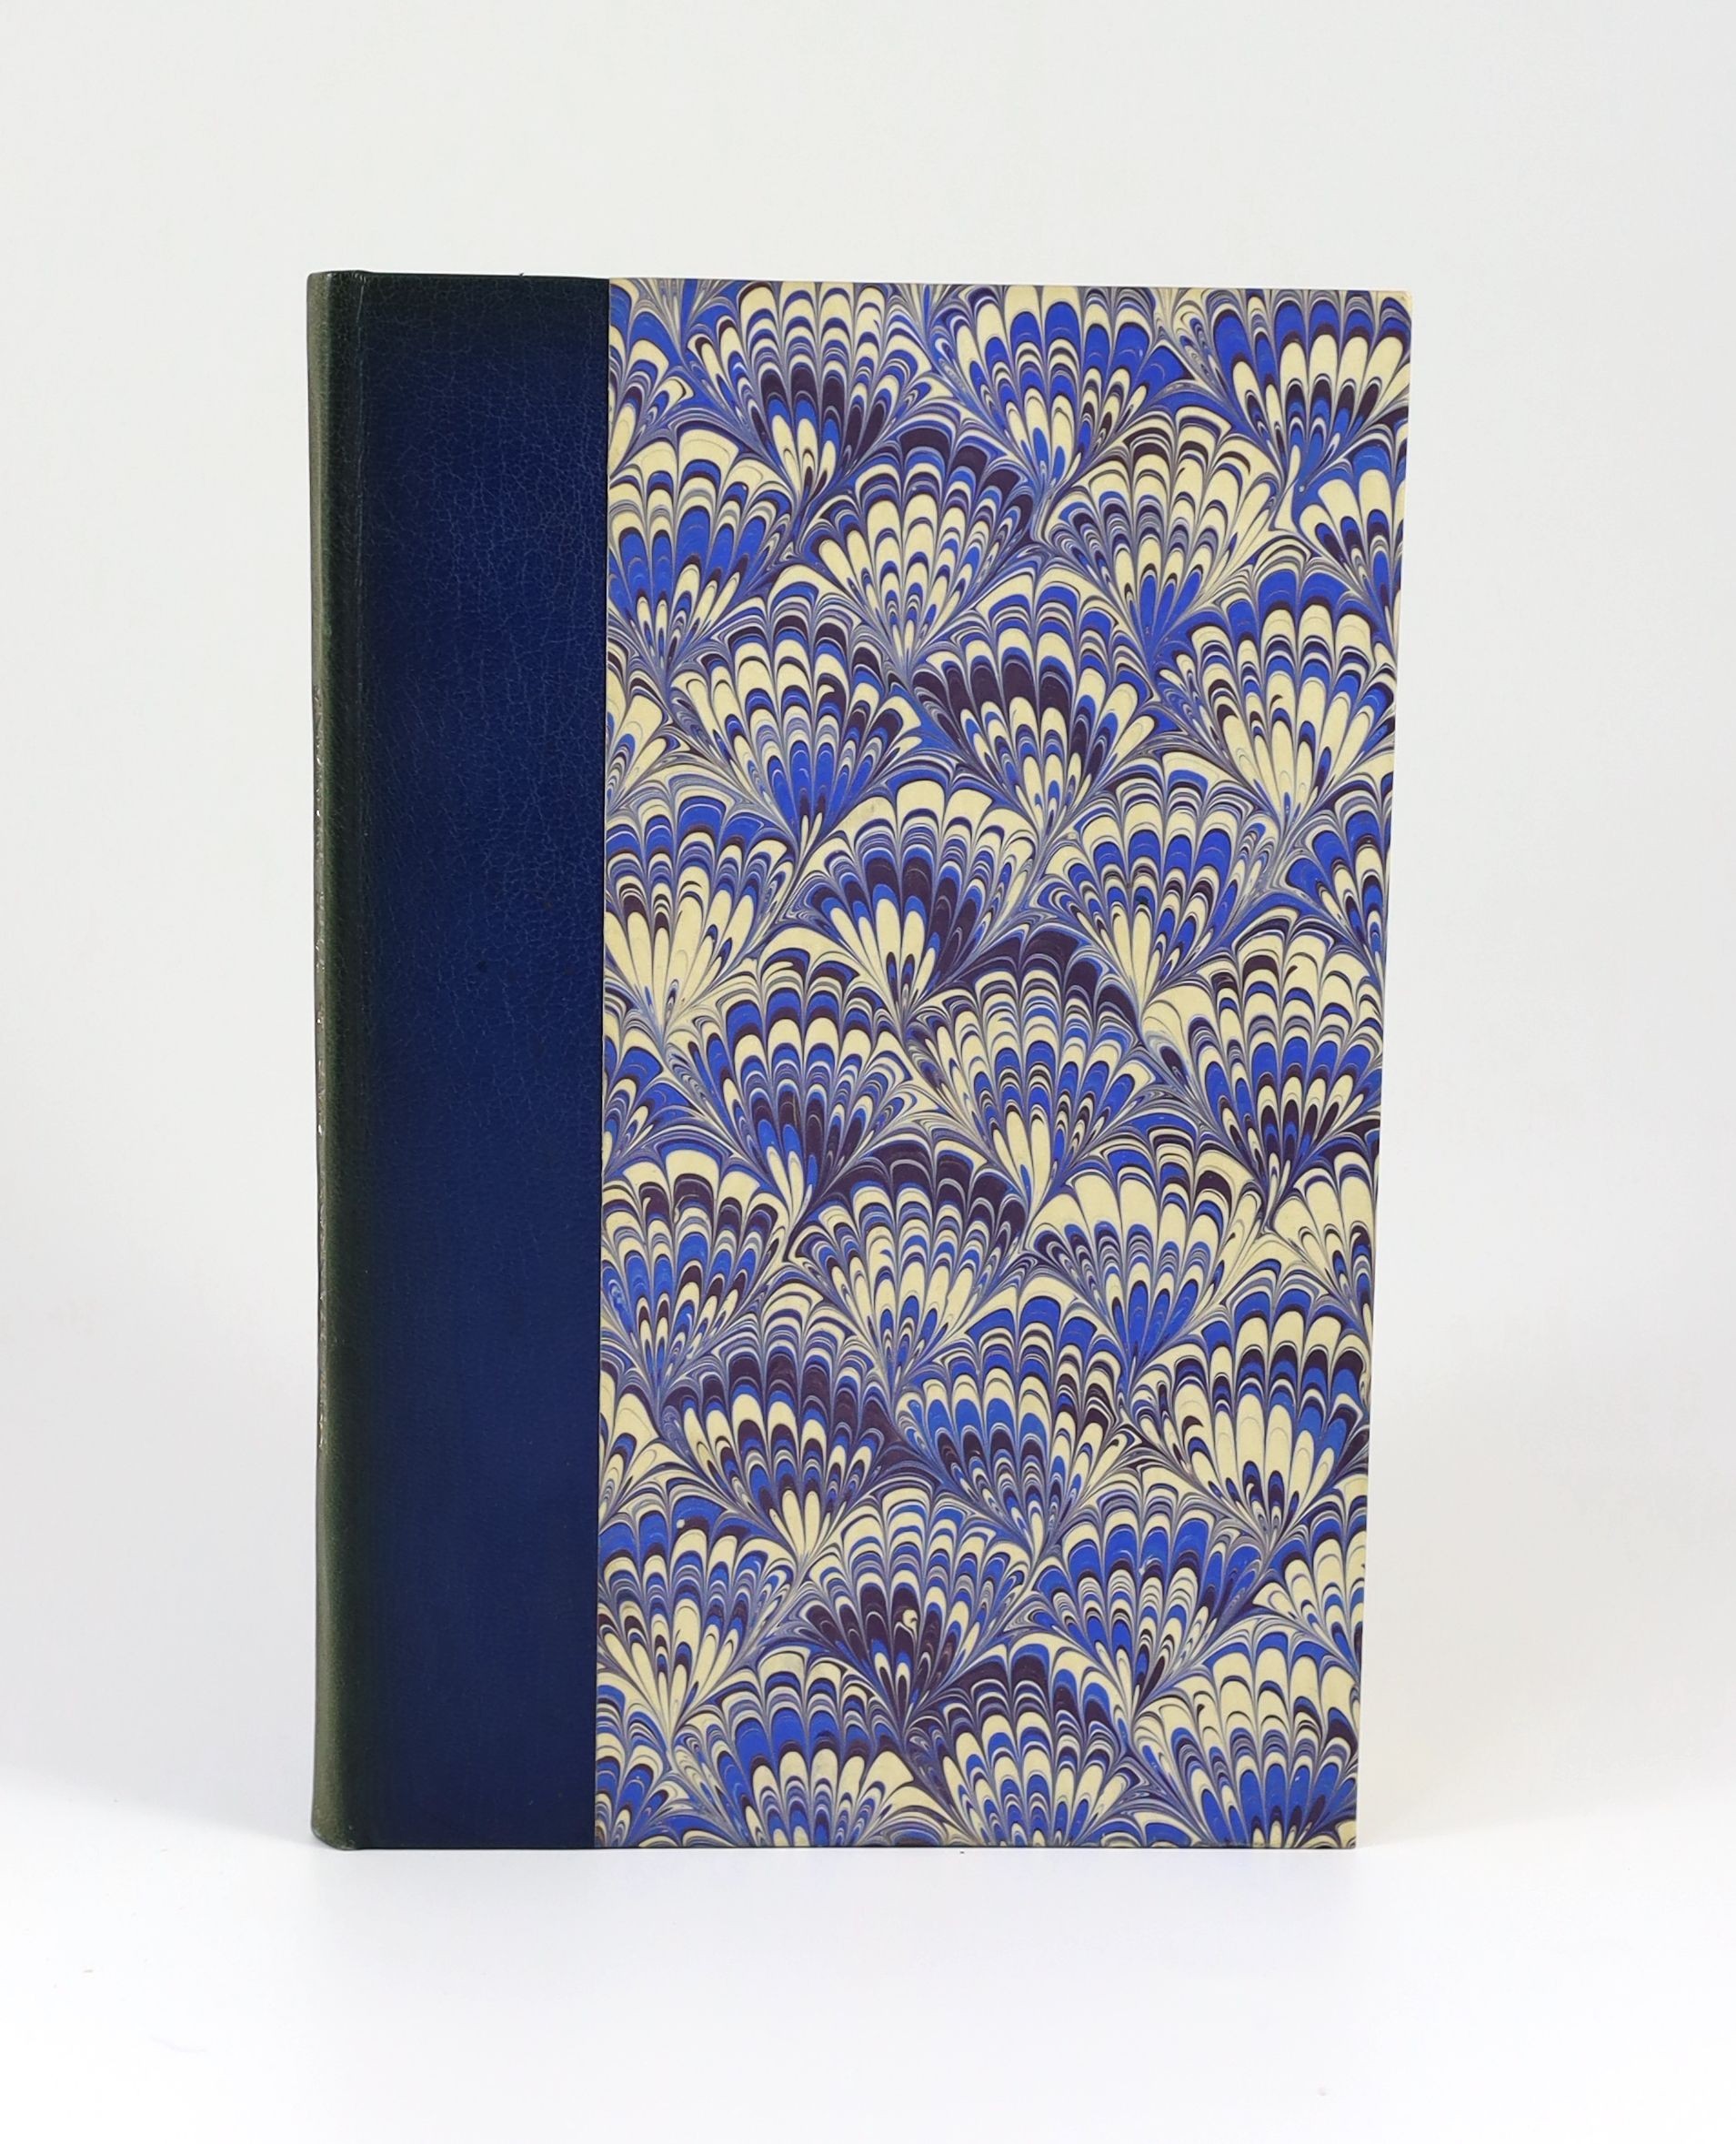 Golden Cockerel Press - Strong, Leonard Alfred George - The Hansom Cab and the Pigeons, illustrated with wood engravings by Eric Ravilious, one of 212, signed by the author, 8vo, quarter leather with patterned blue and w